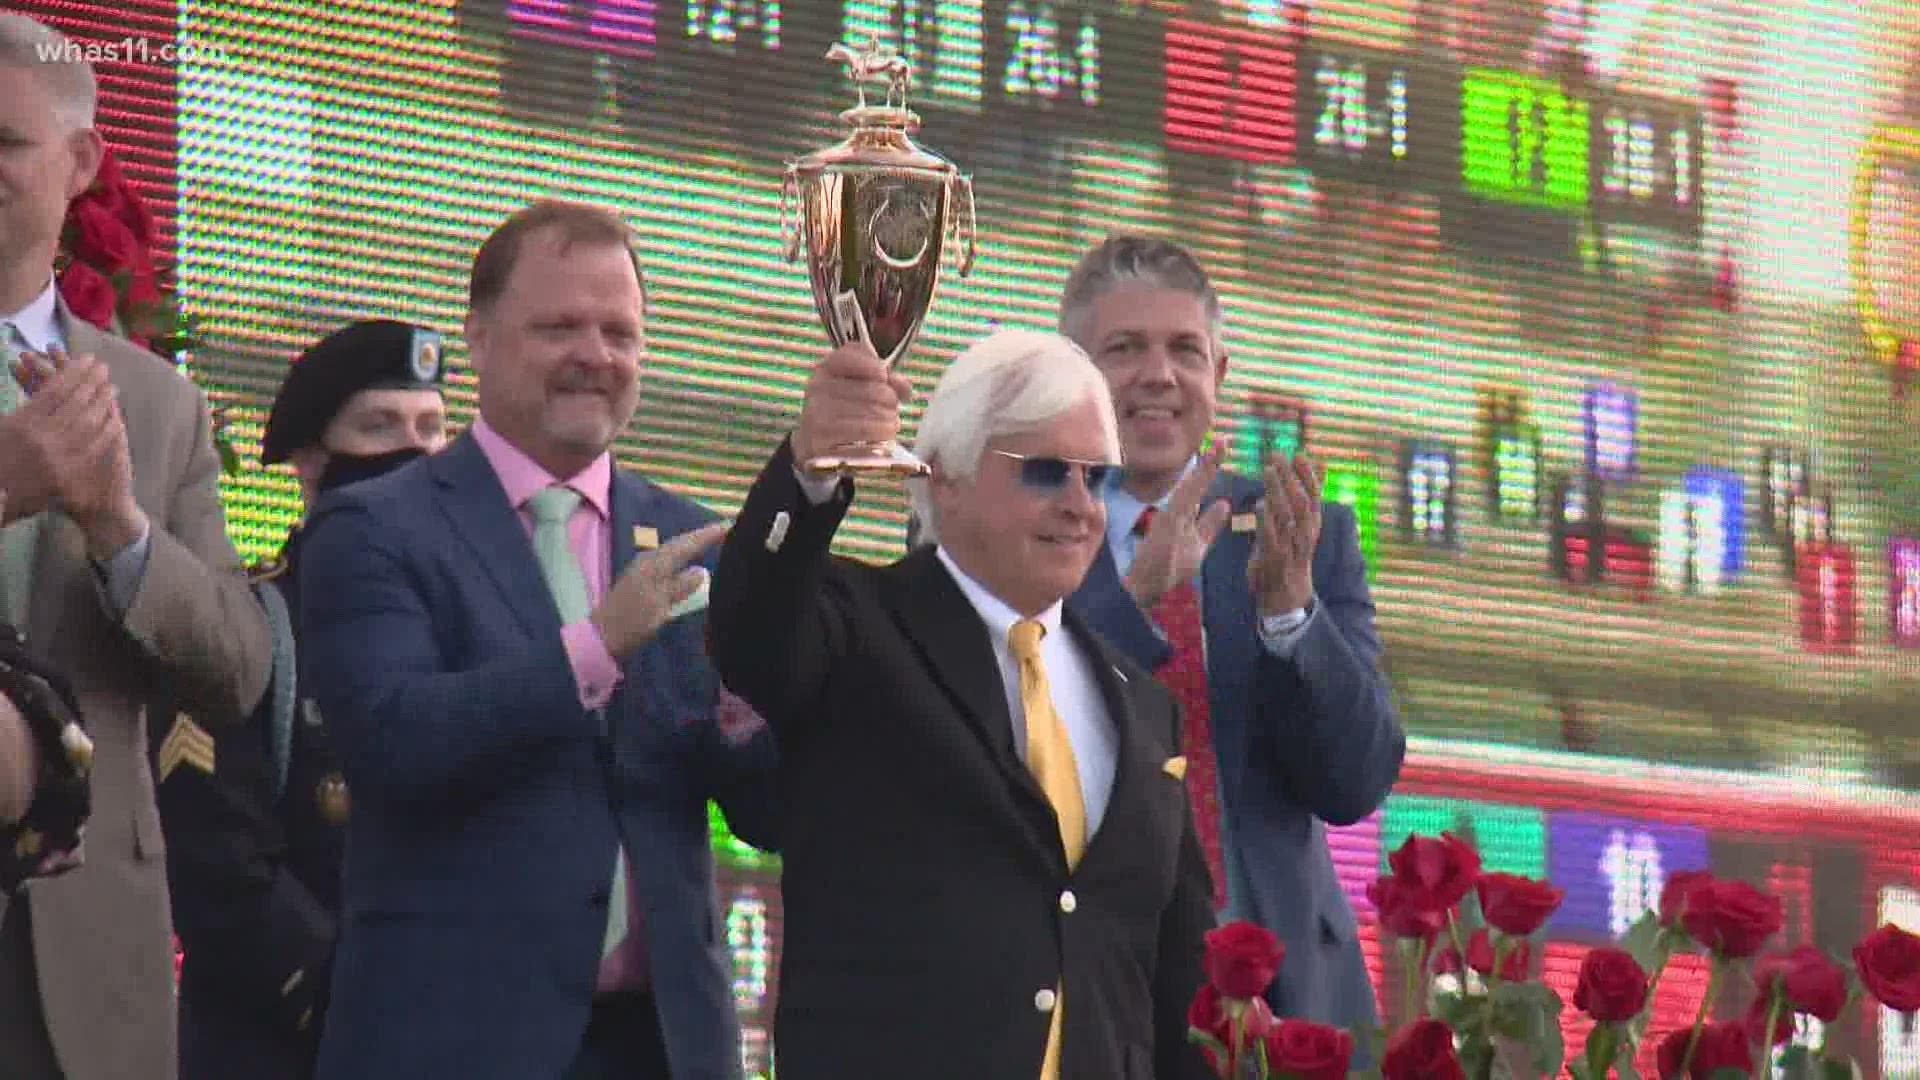 Churchill Downs announced they are suspending Bob Baffert-trained horses from racing at the track for two years but no official decision on Derby disqualification.